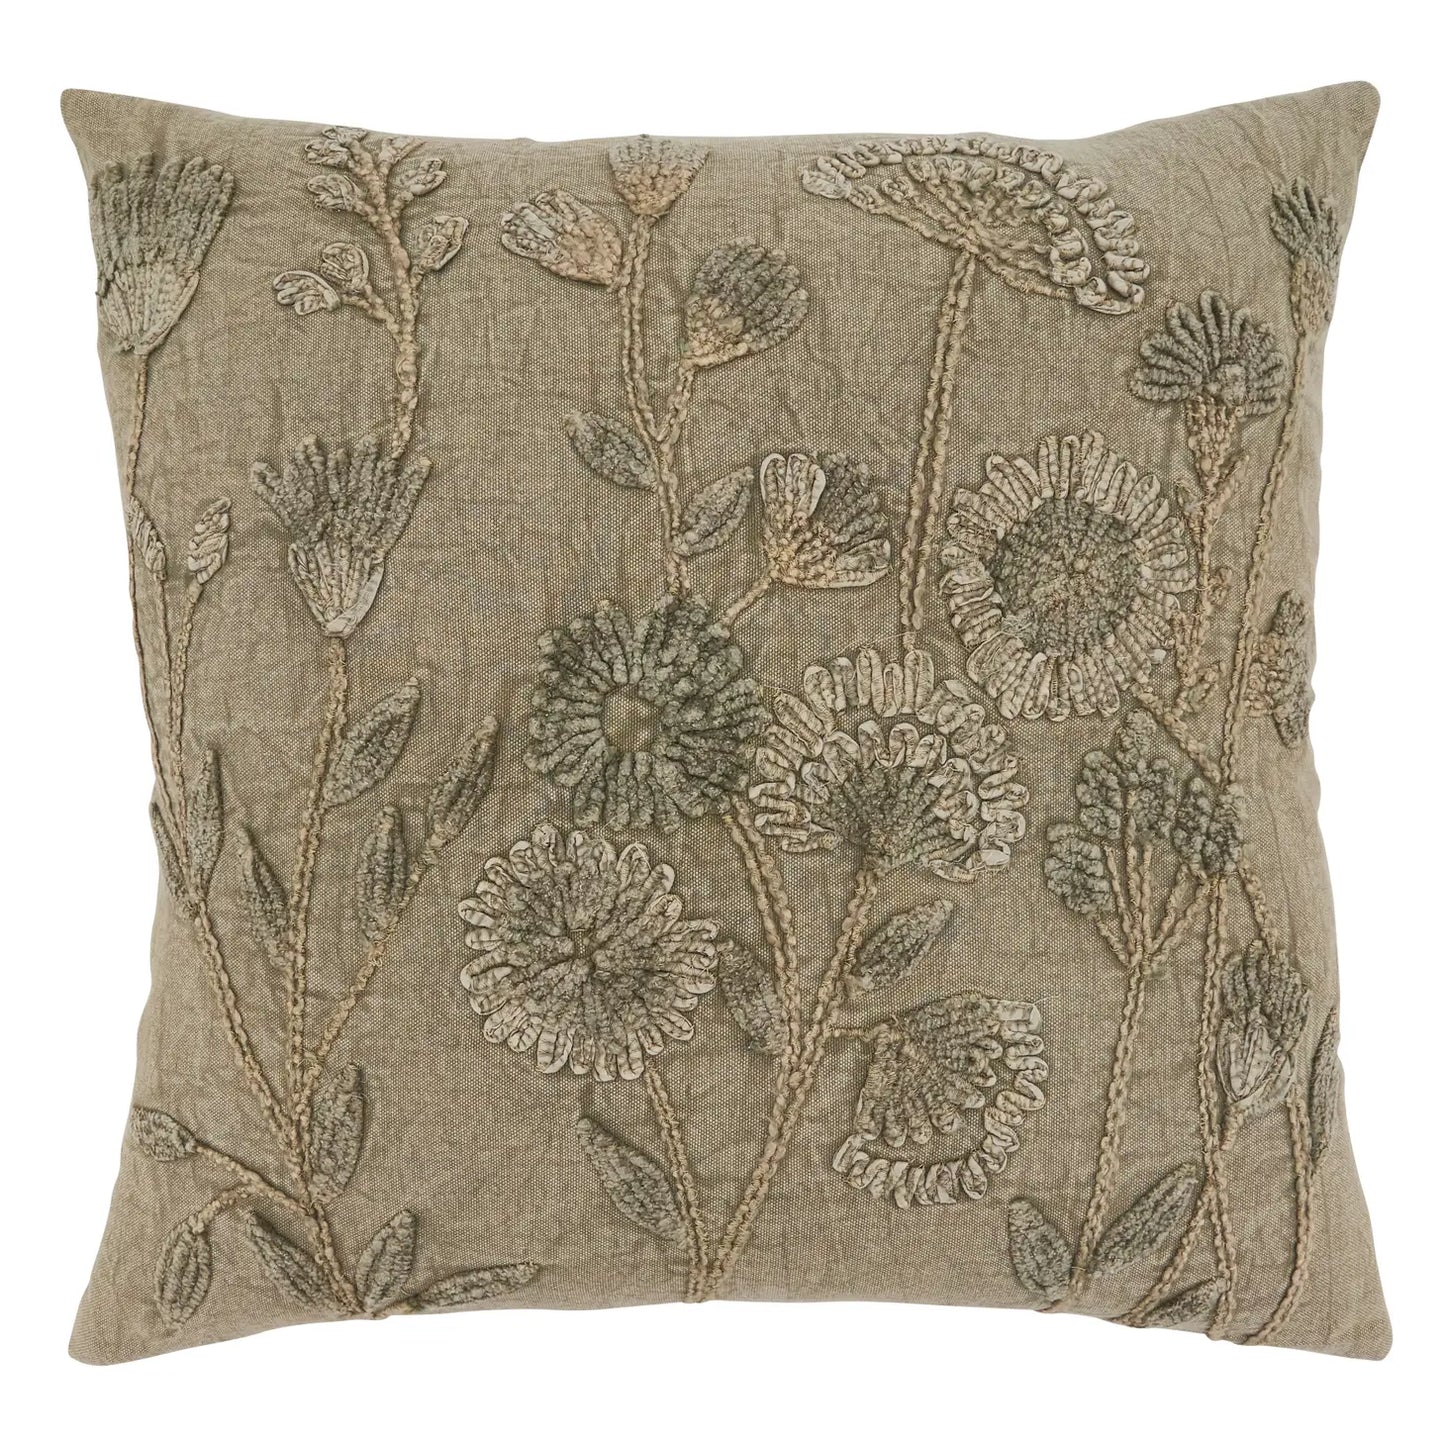 STONE FLORAL PILLOW